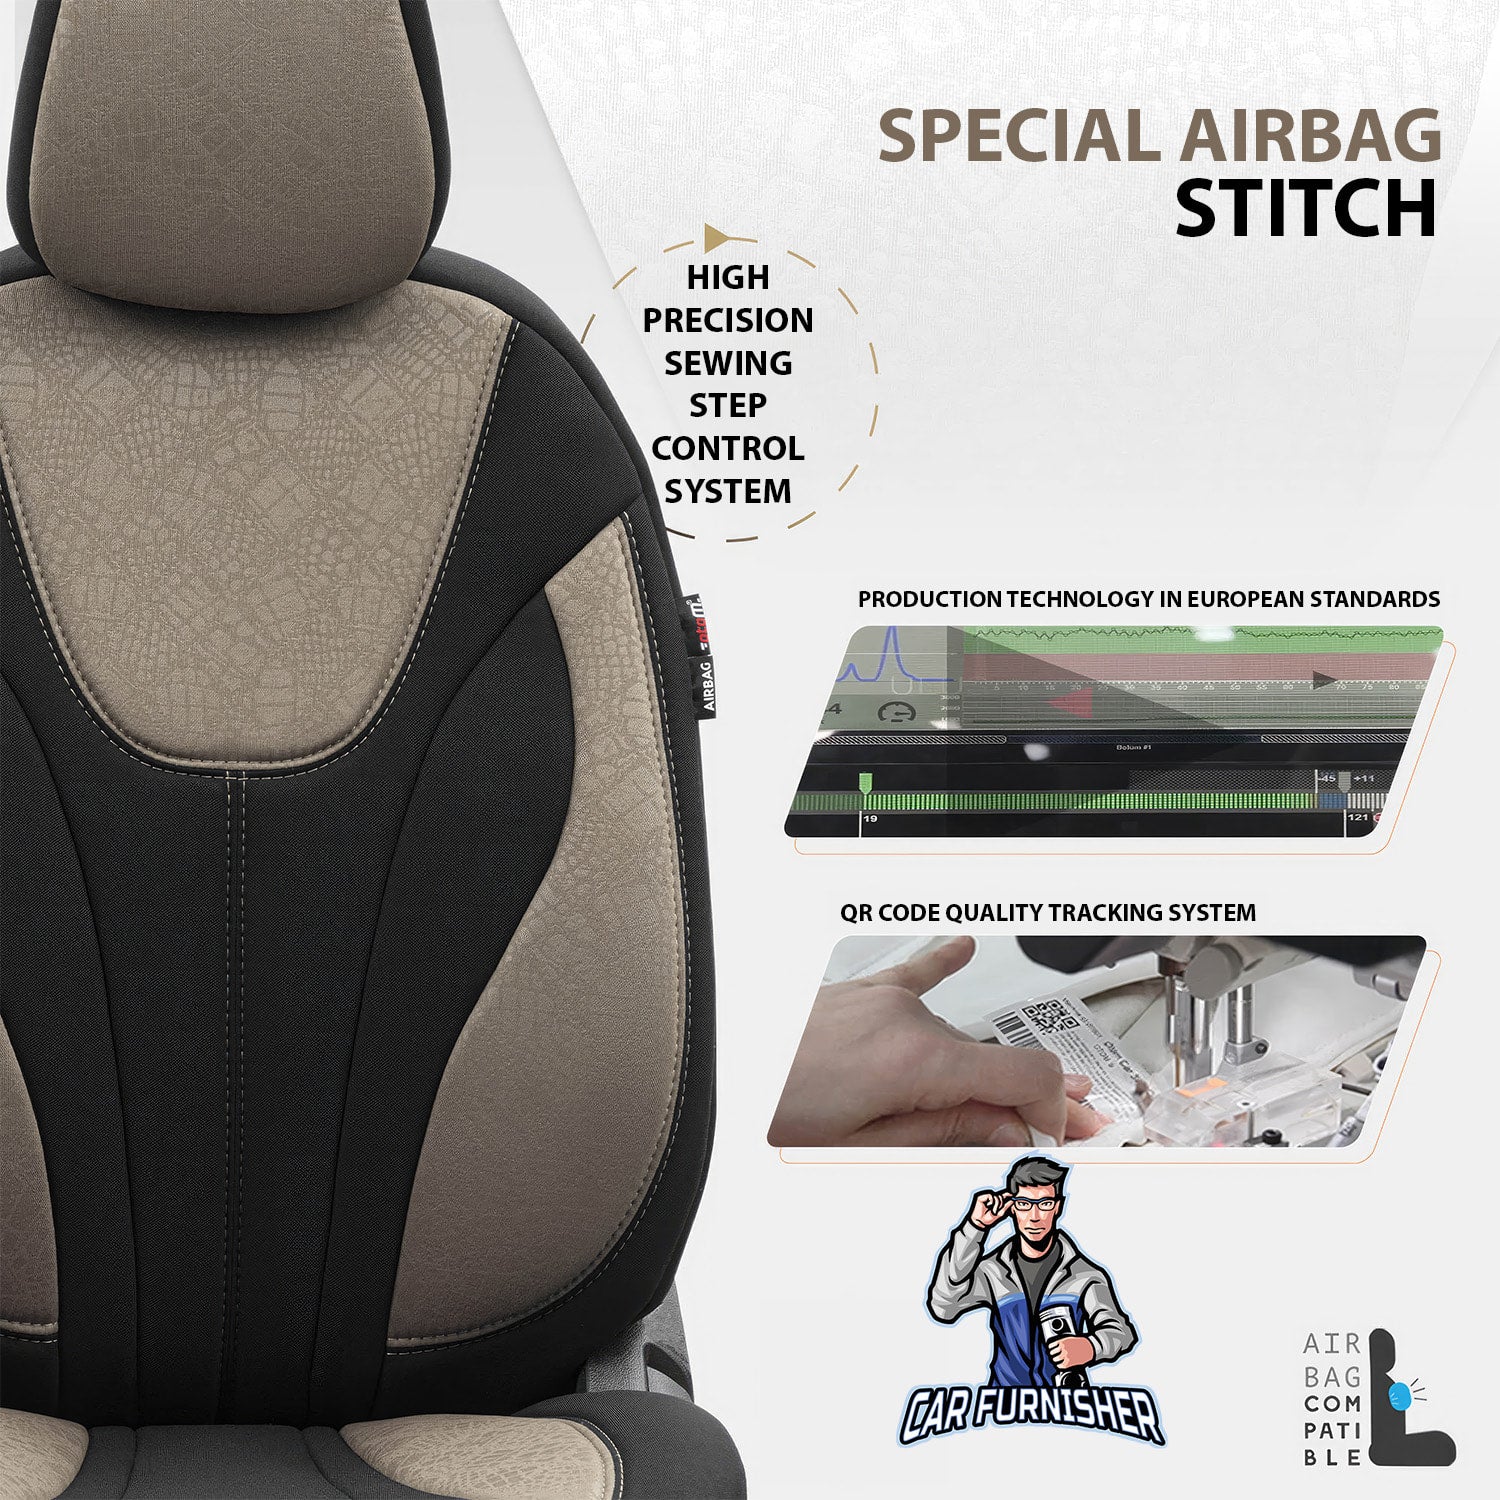 Car Seat Cover Set - Ruby Design Beige 5 Seats + Headrests (Full Set) Foal Feather Fabric